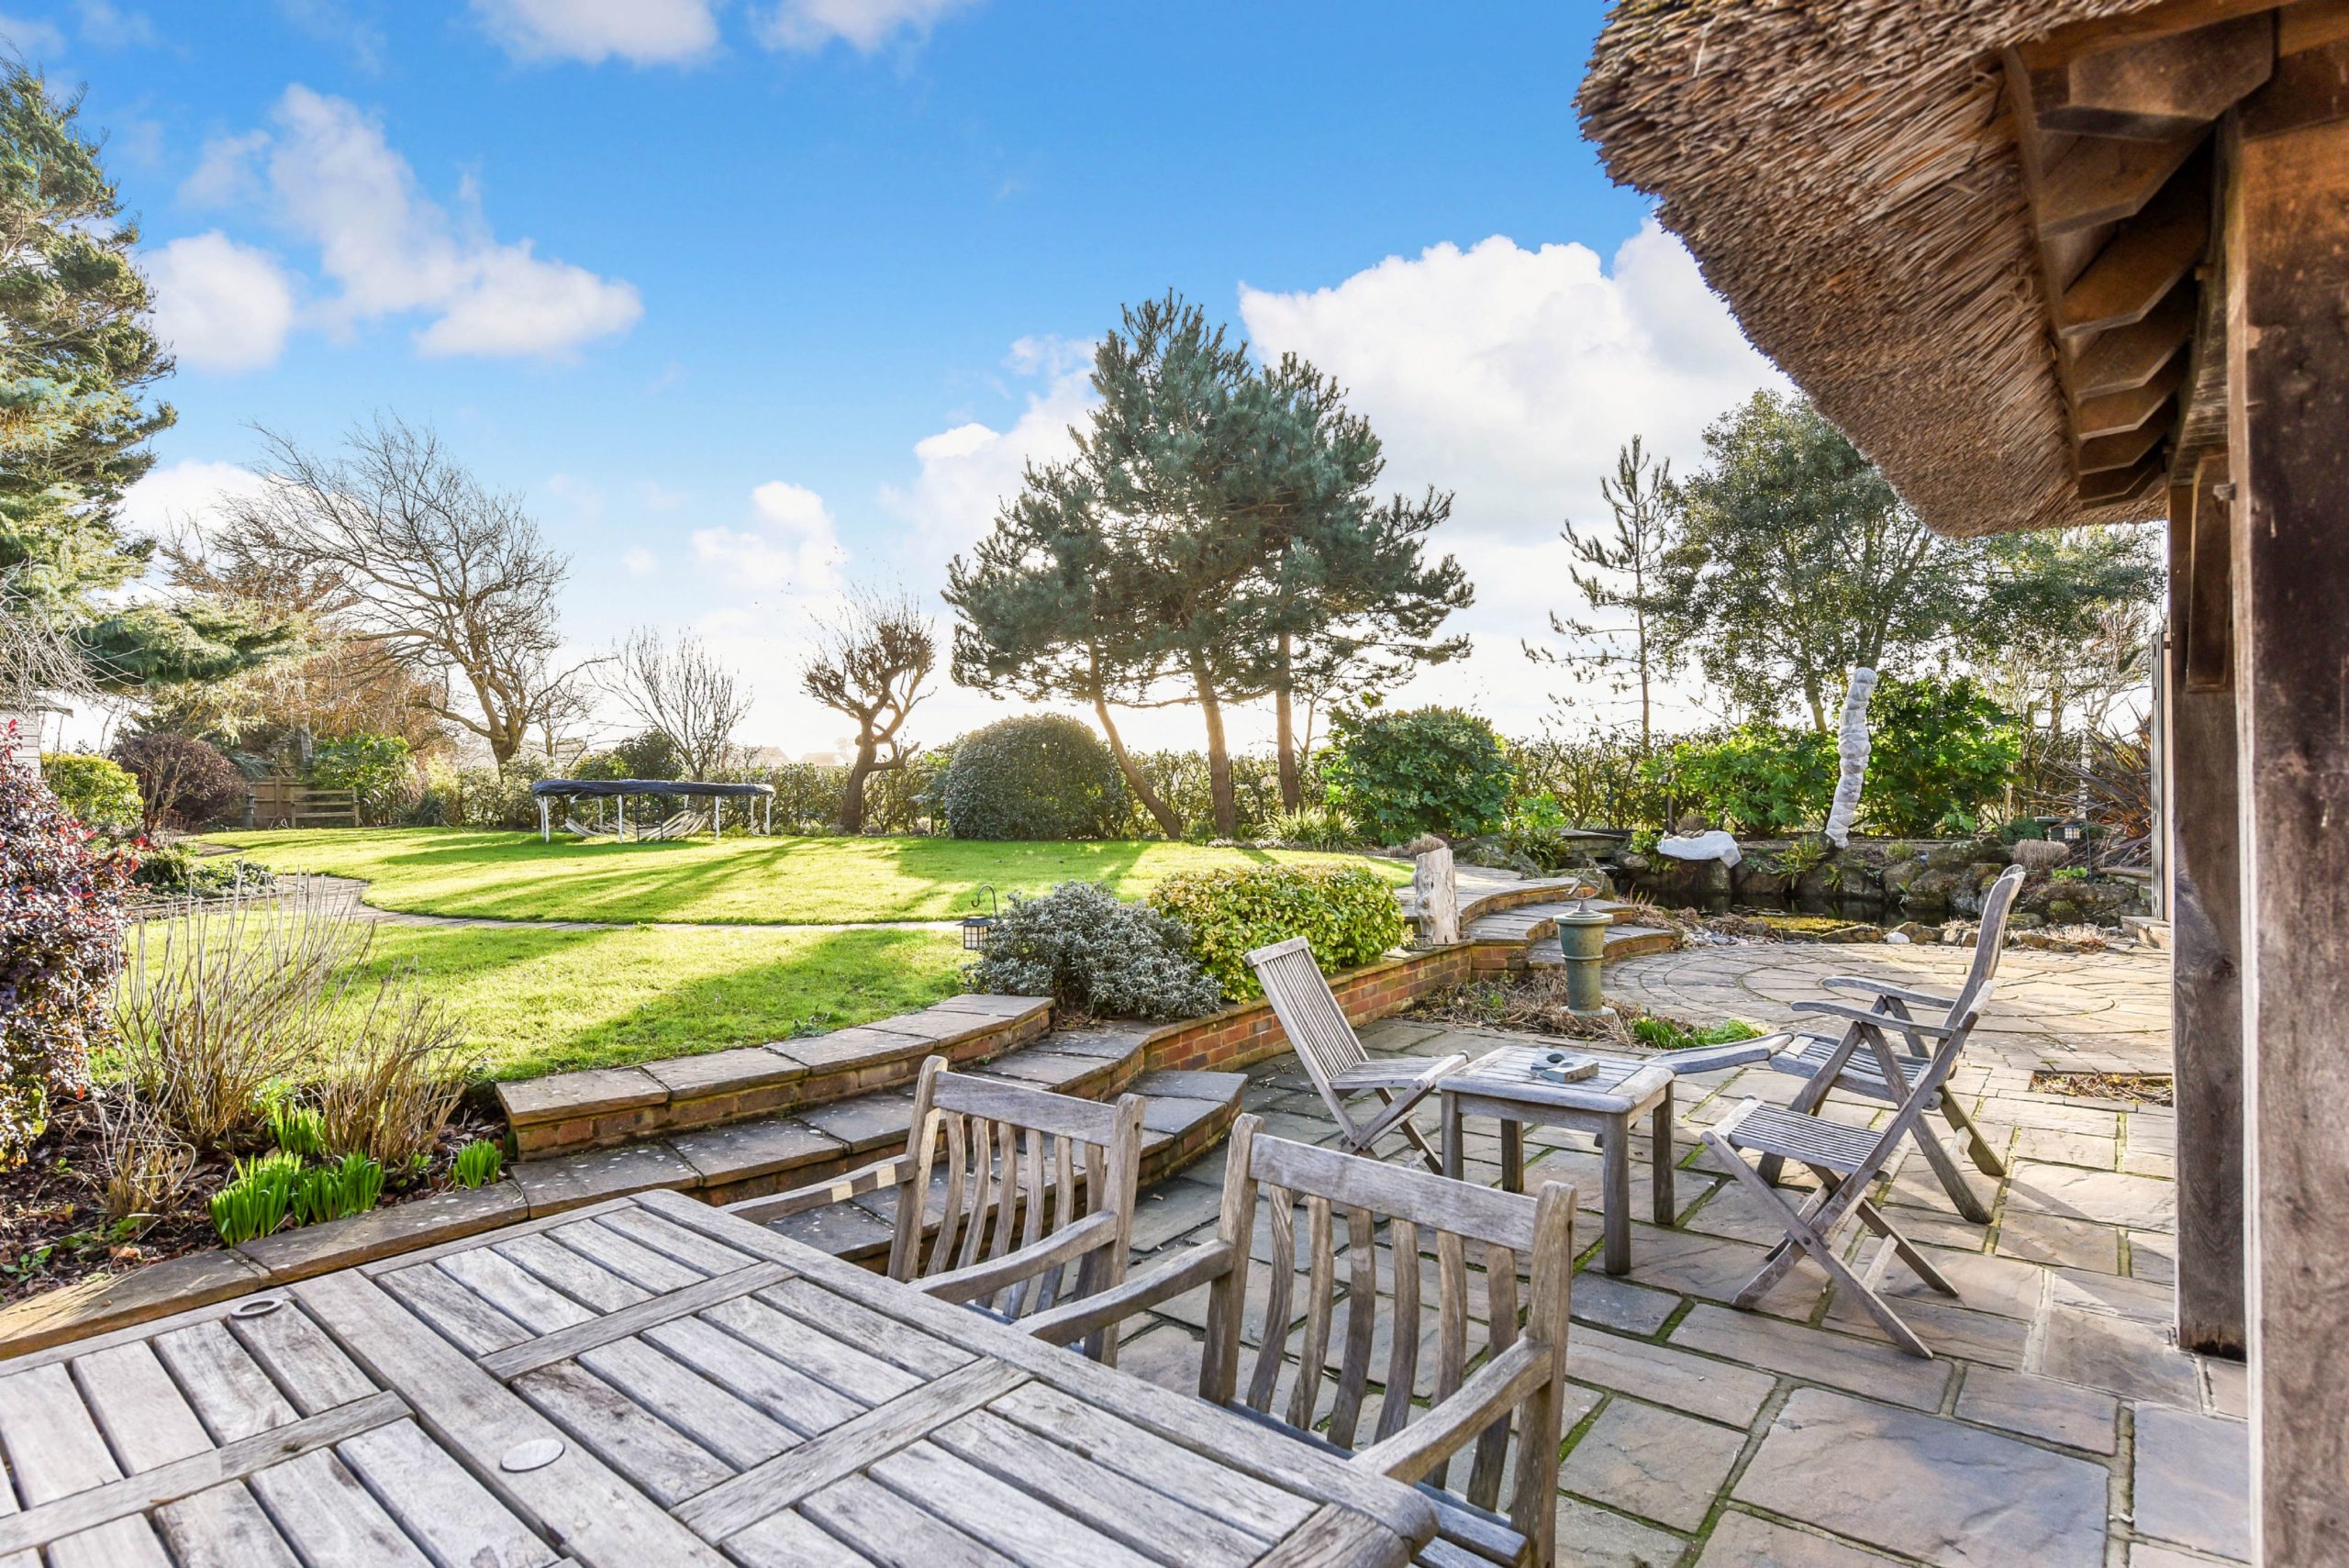 Berry Barn Cottage, West Wittering